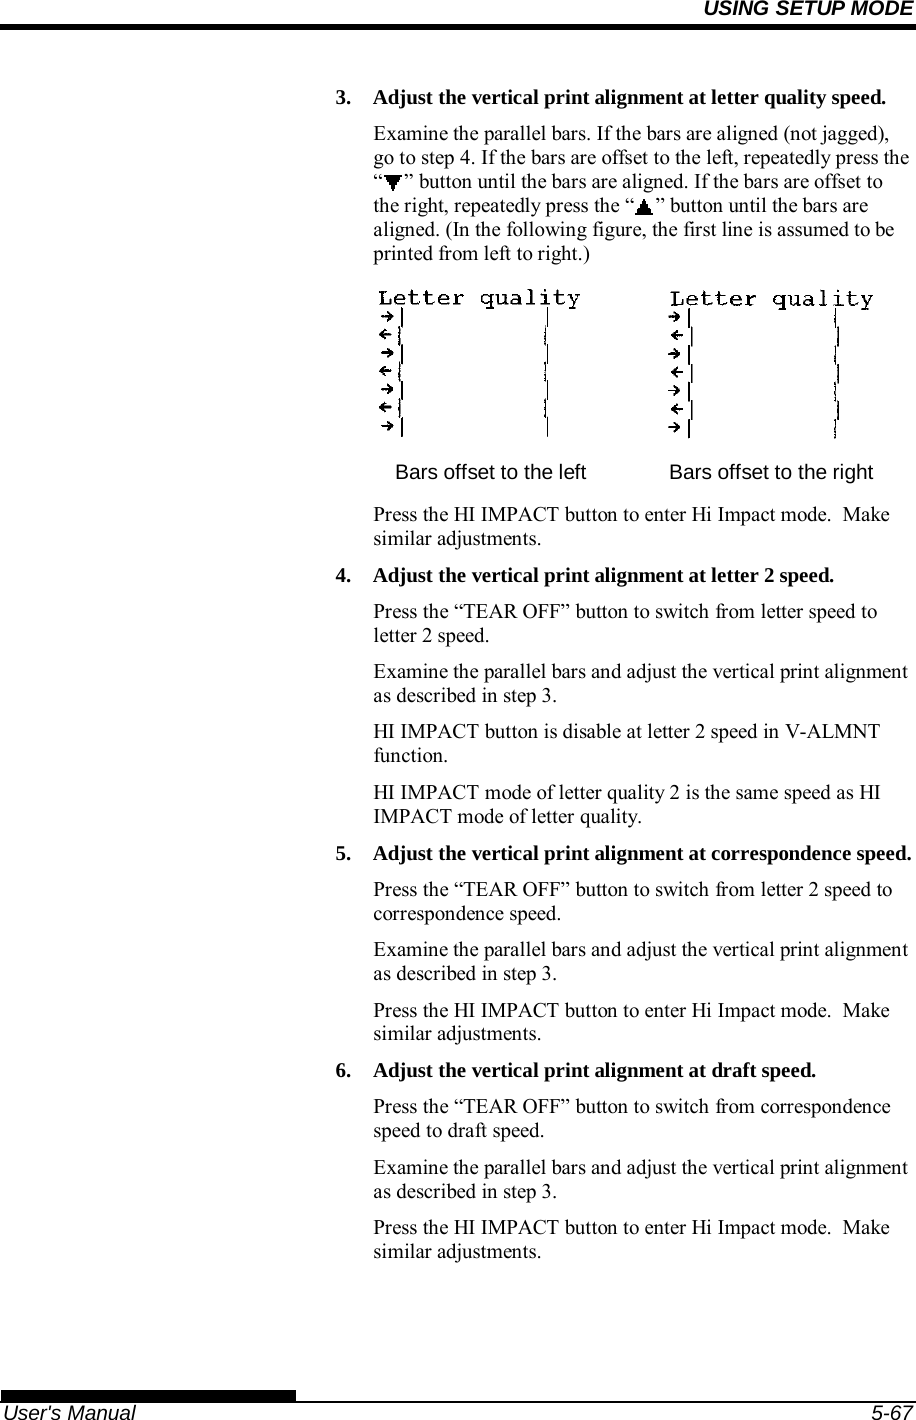 USING SETUP MODE   User&apos;s Manual  5-67 3.  Adjust the vertical print alignment at letter quality speed. Examine the parallel bars. If the bars are aligned (not jagged), go to step 4. If the bars are offset to the left, repeatedly press the “ ” button until the bars are aligned. If the bars are offset to the right, repeatedly press the “ ” button until the bars are aligned. (In the following figure, the first line is assumed to be printed from left to right.)    Bars offset to the left  Bars offset to the right Press the HI IMPACT button to enter Hi Impact mode.  Make similar adjustments. 4.  Adjust the vertical print alignment at letter 2 speed. Press the “TEAR OFF” button to switch from letter speed to letter 2 speed. Examine the parallel bars and adjust the vertical print alignment as described in step 3. HI IMPACT button is disable at letter 2 speed in V-ALMNT function. HI IMPACT mode of letter quality 2 is the same speed as HI IMPACT mode of letter quality. 5.  Adjust the vertical print alignment at correspondence speed. Press the “TEAR OFF” button to switch from letter 2 speed to correspondence speed. Examine the parallel bars and adjust the vertical print alignment as described in step 3. Press the HI IMPACT button to enter Hi Impact mode.  Make similar adjustments. 6.  Adjust the vertical print alignment at draft speed. Press the “TEAR OFF” button to switch from correspondence speed to draft speed. Examine the parallel bars and adjust the vertical print alignment as described in step 3. Press the HI IMPACT button to enter Hi Impact mode.  Make similar adjustments. 